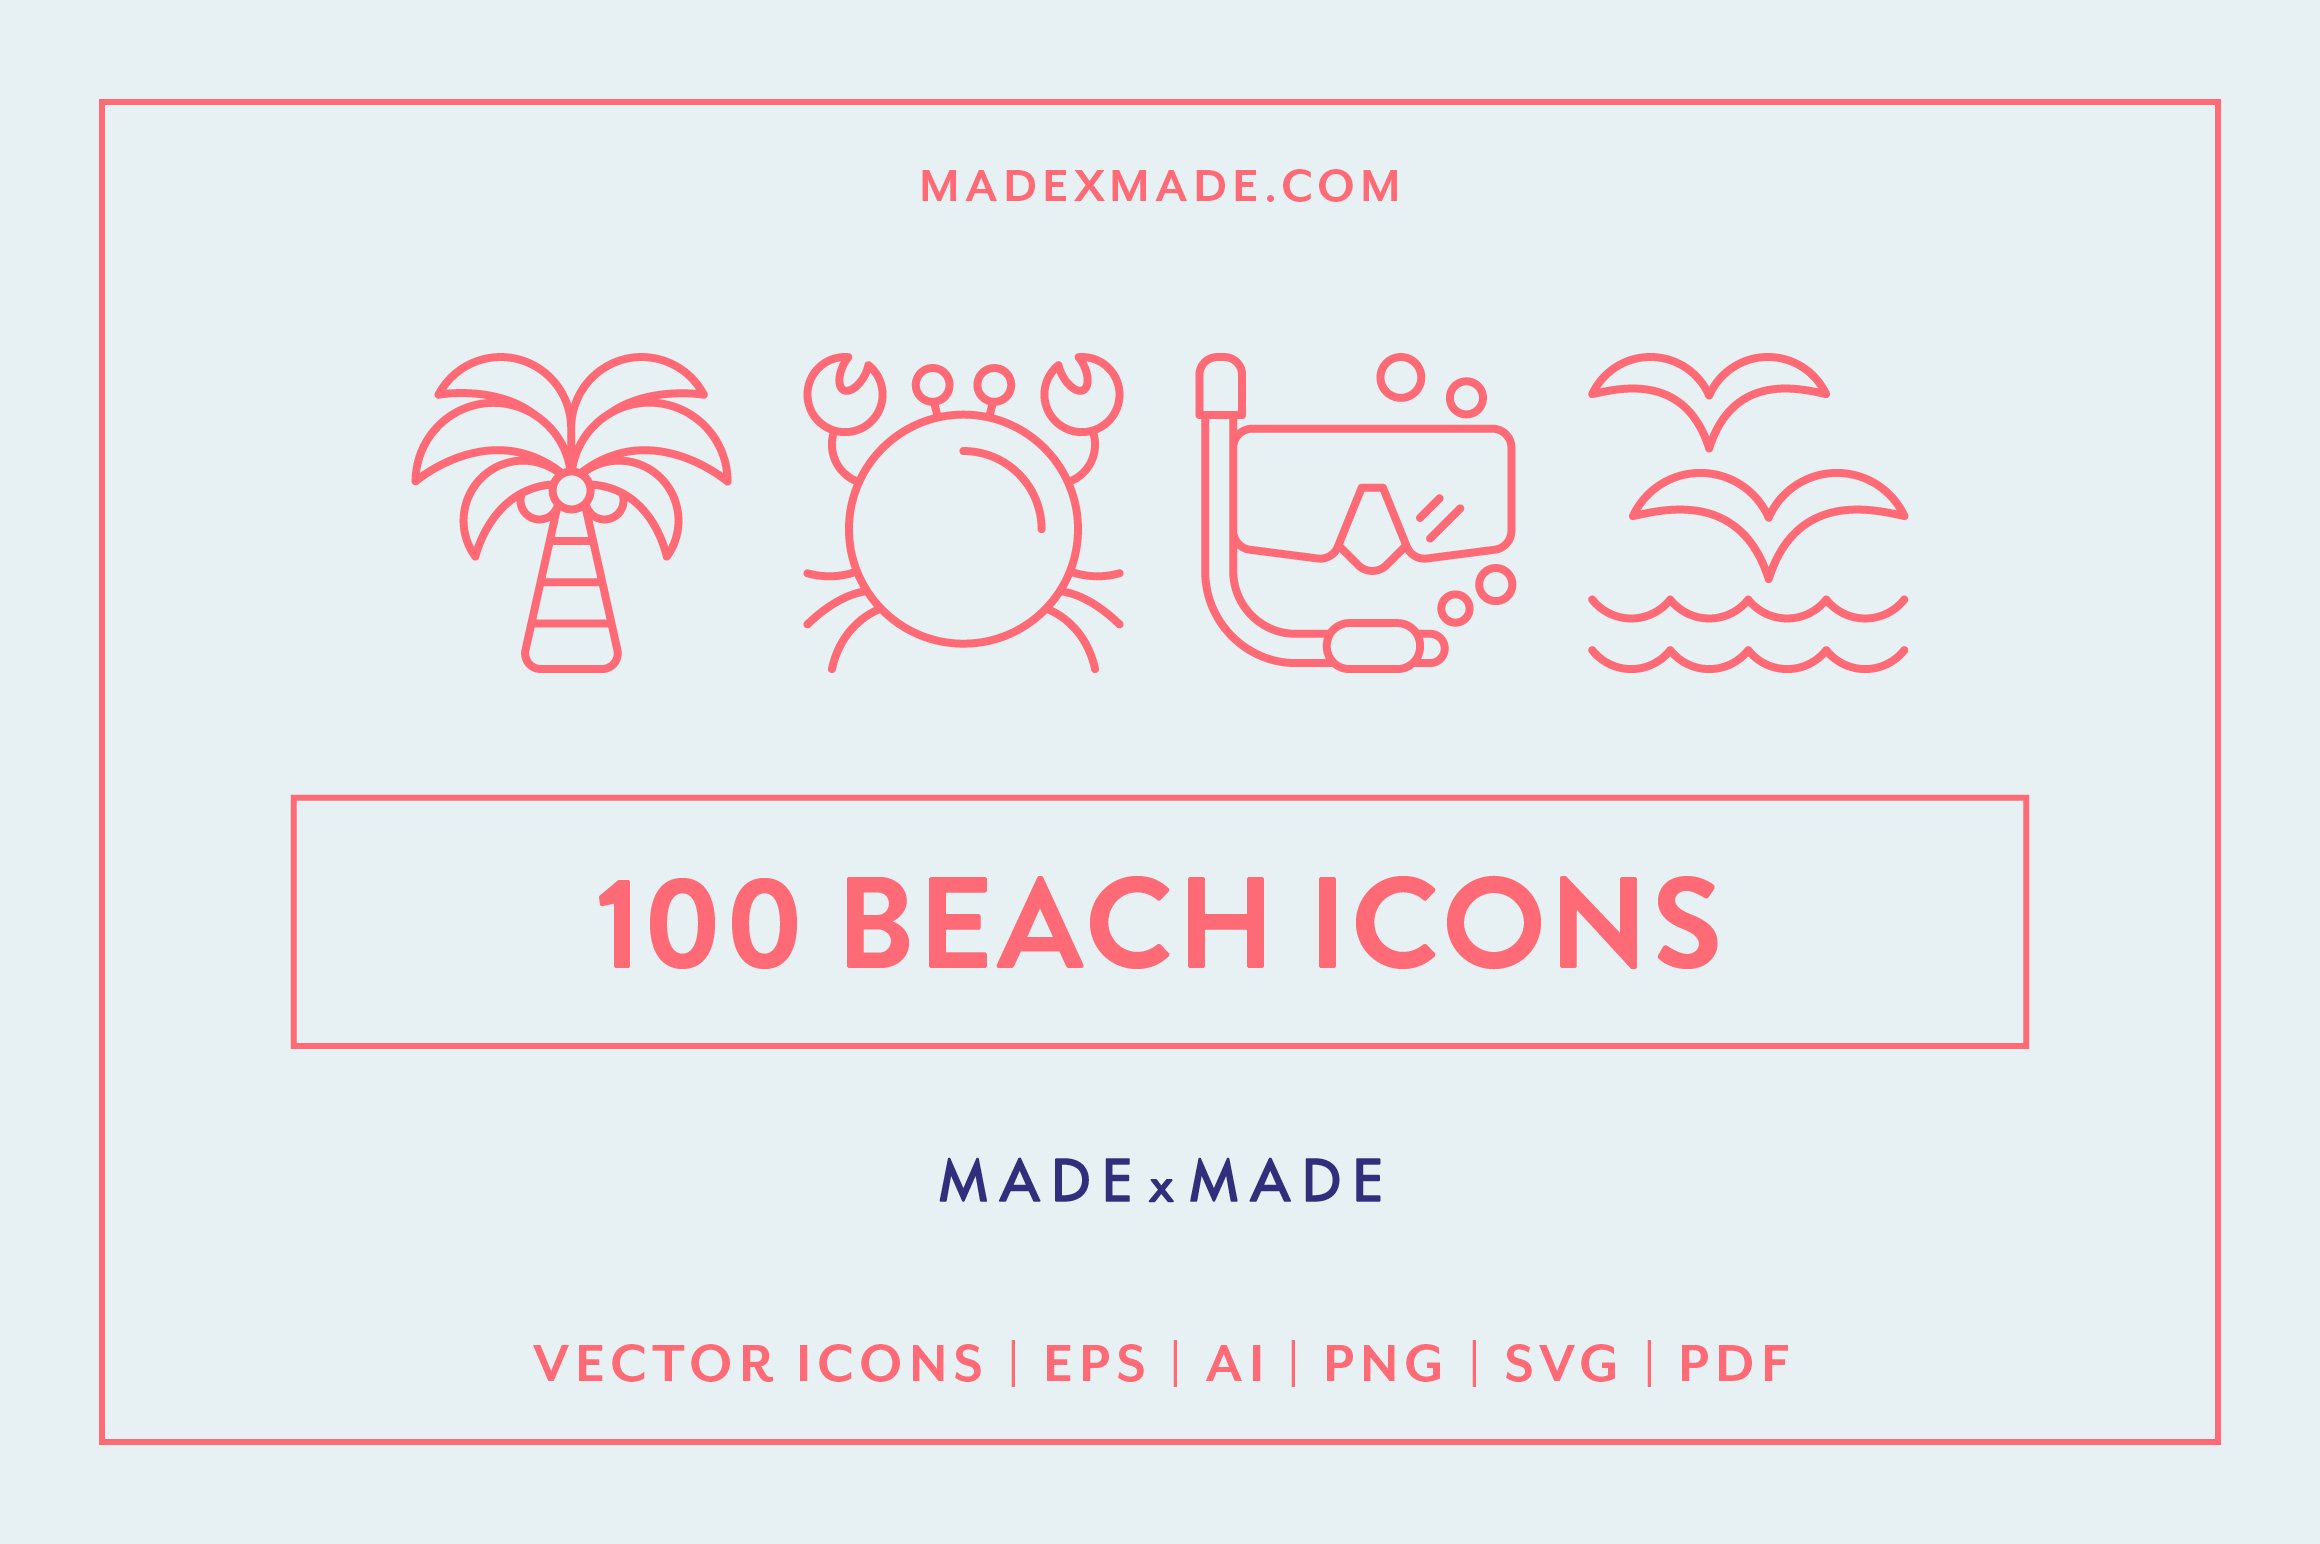 Beach Line Icons cover image.